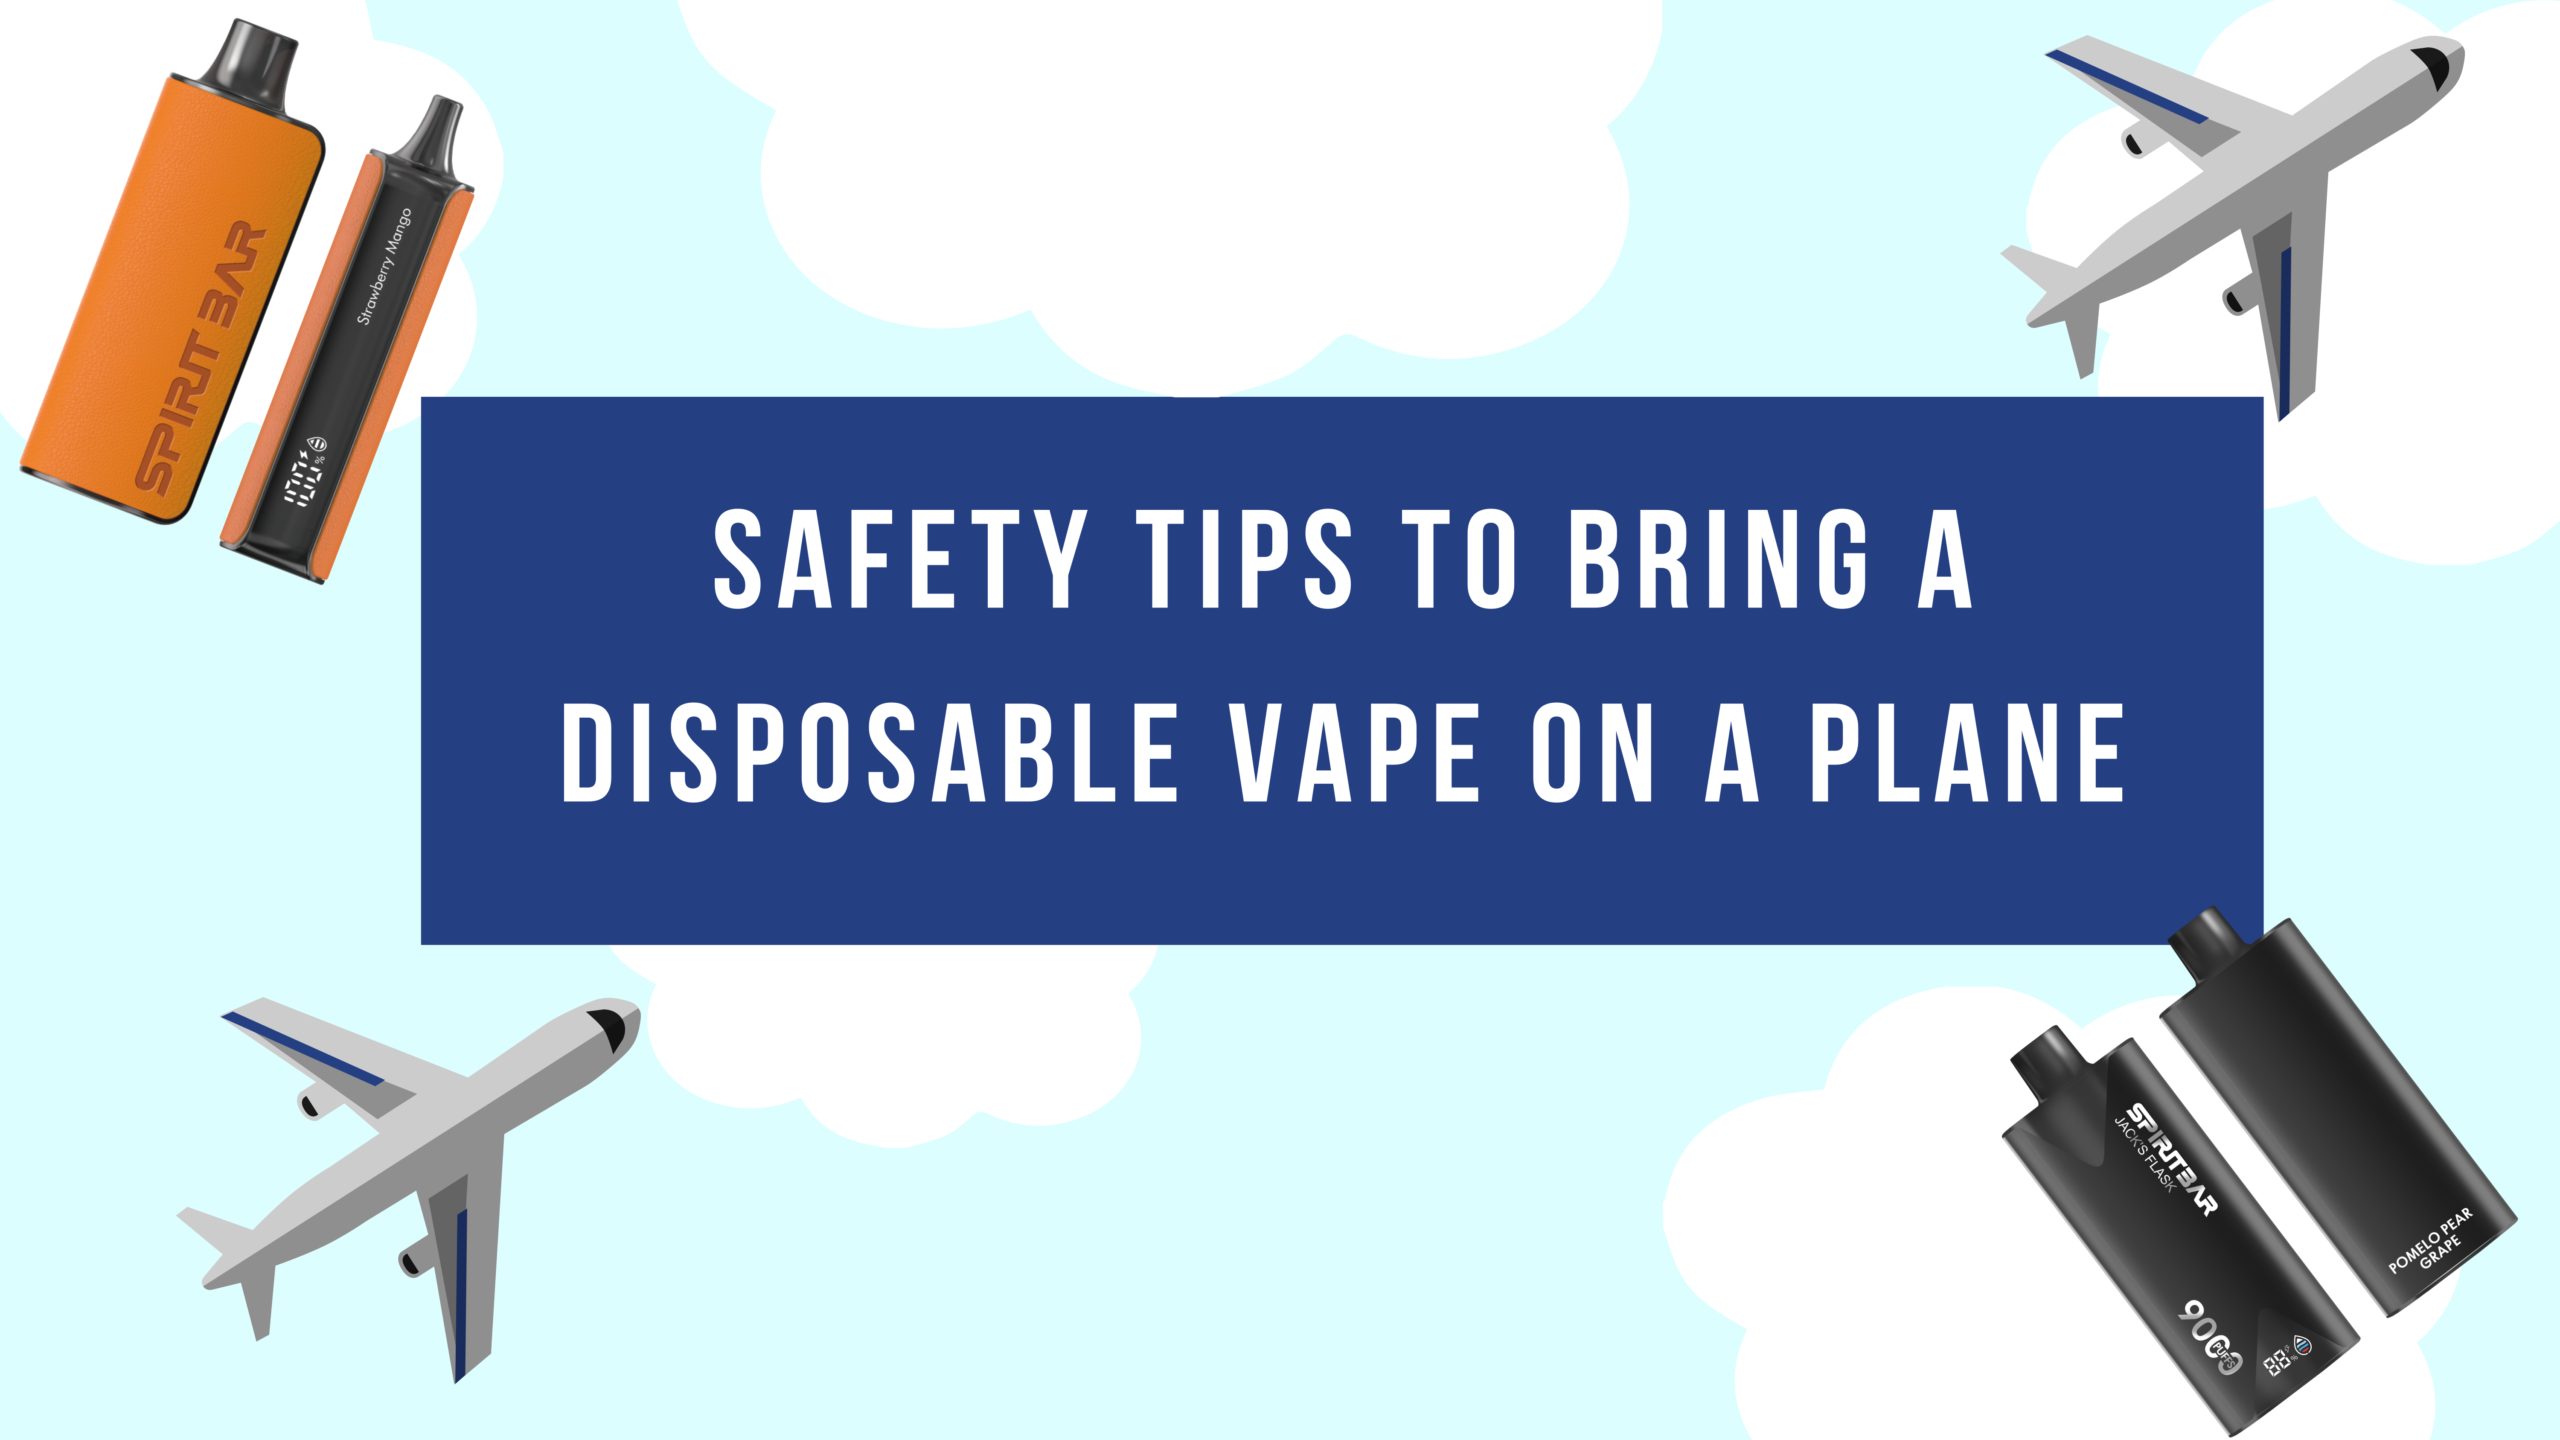 Safety Tips to Bring a Disposable Vape on a Plane